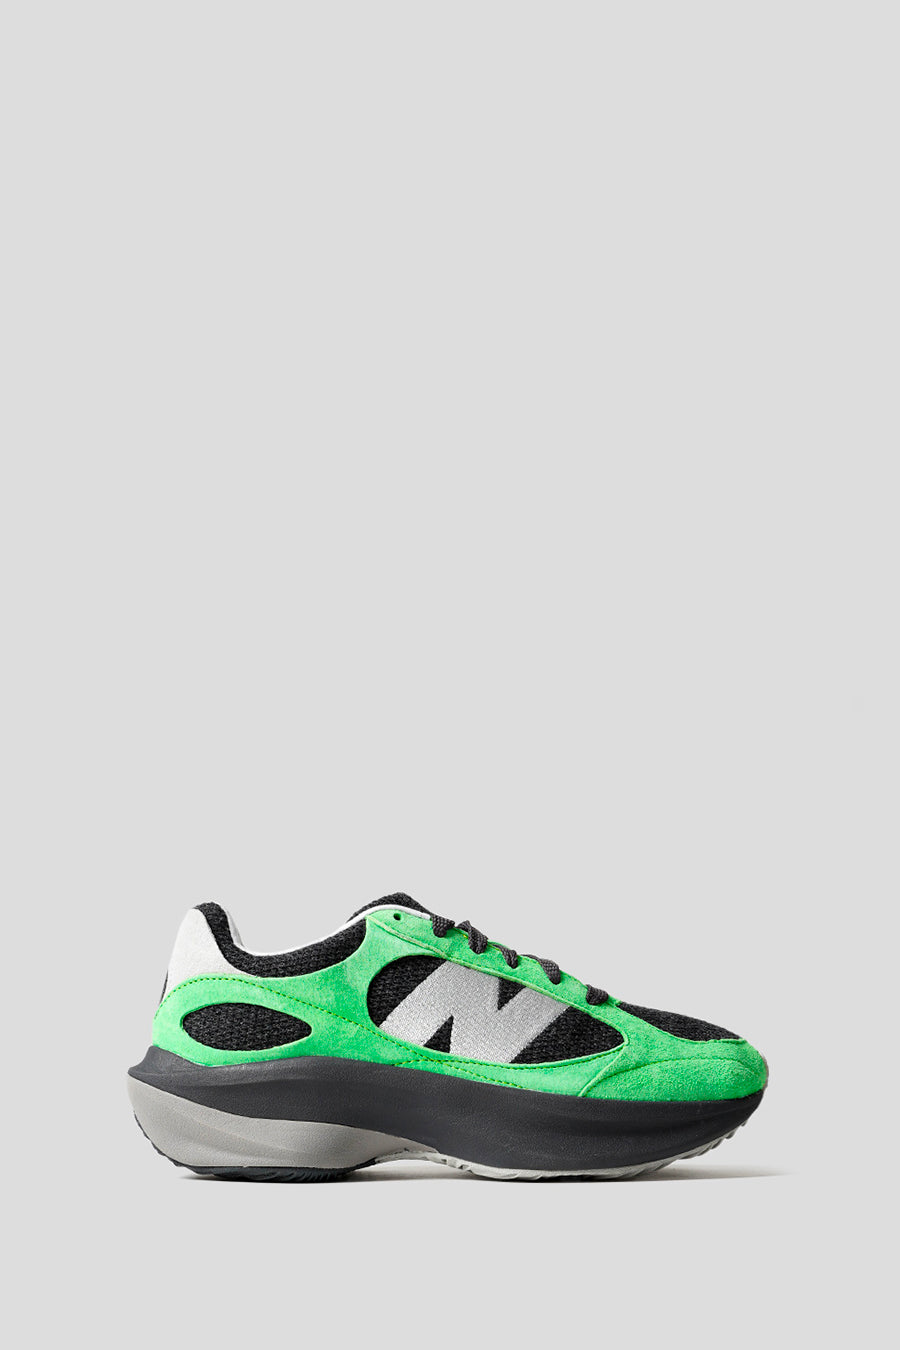 NEW BALANCE - WRPD RUNNER GREEN AND PHANTOM SNEAKERS - LE LABO STORE